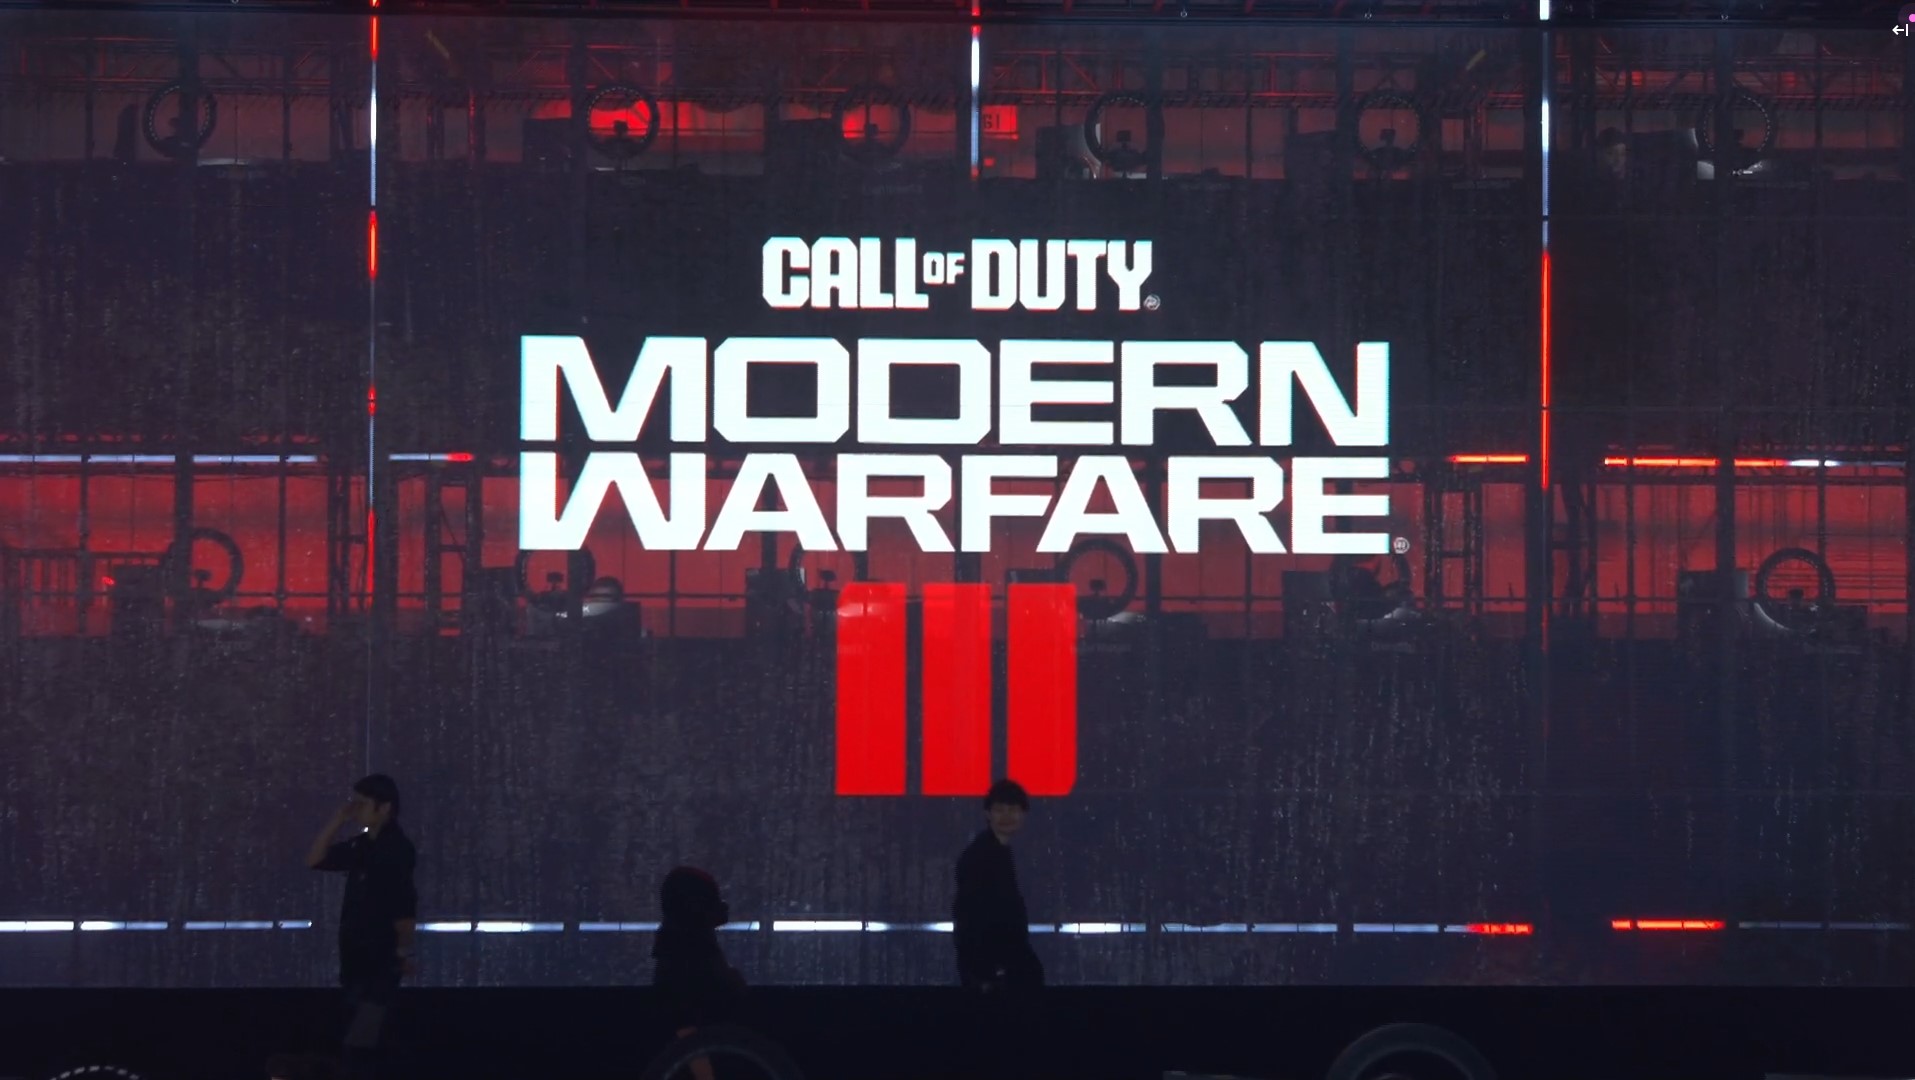 When is Ranked Play Coming to Call of Duty Modern Warfare 3? What